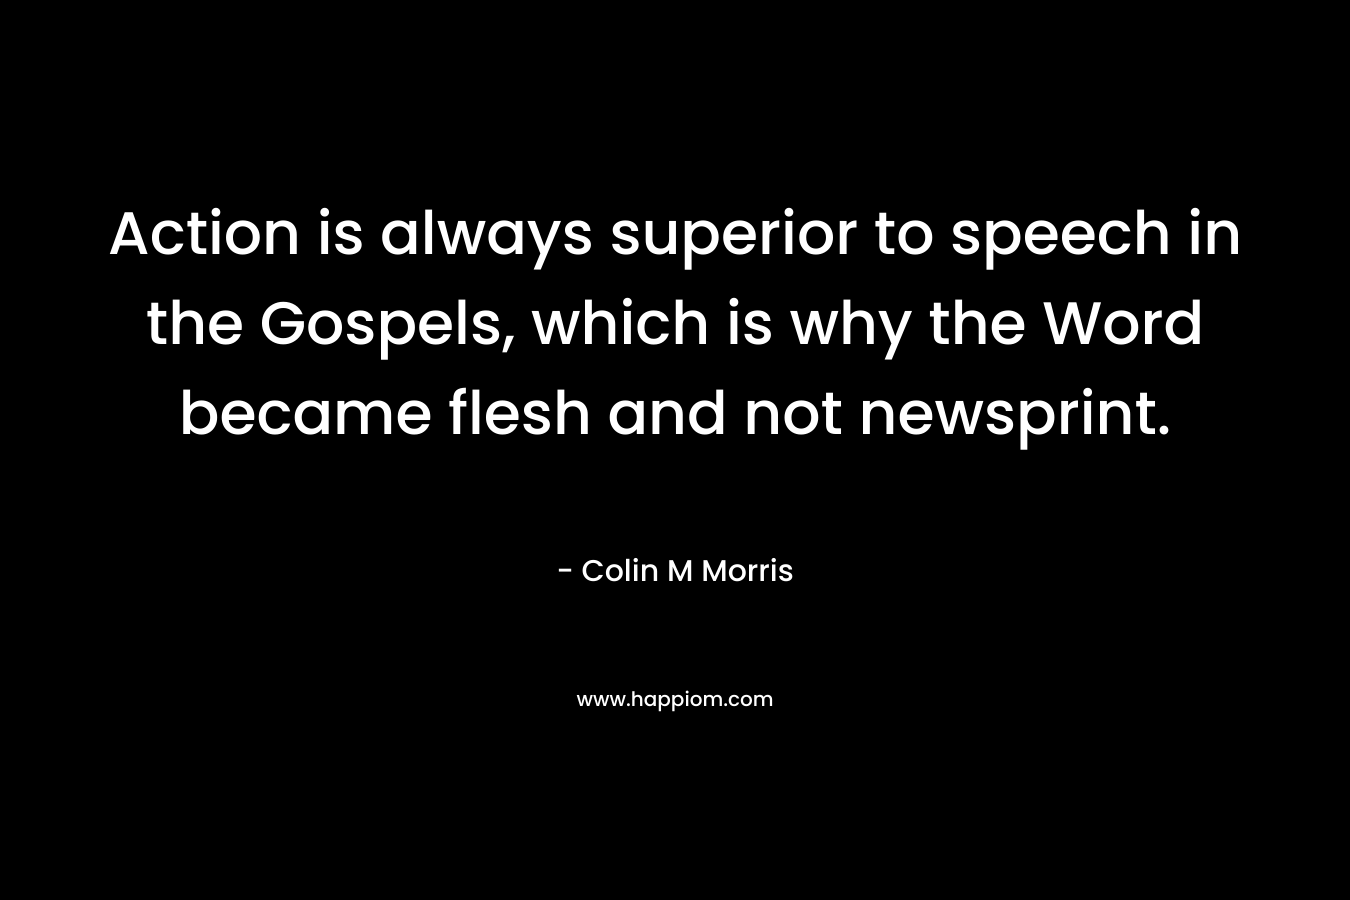 Action is always superior to speech in the Gospels, which is why the Word became flesh and not newsprint. – Colin M Morris